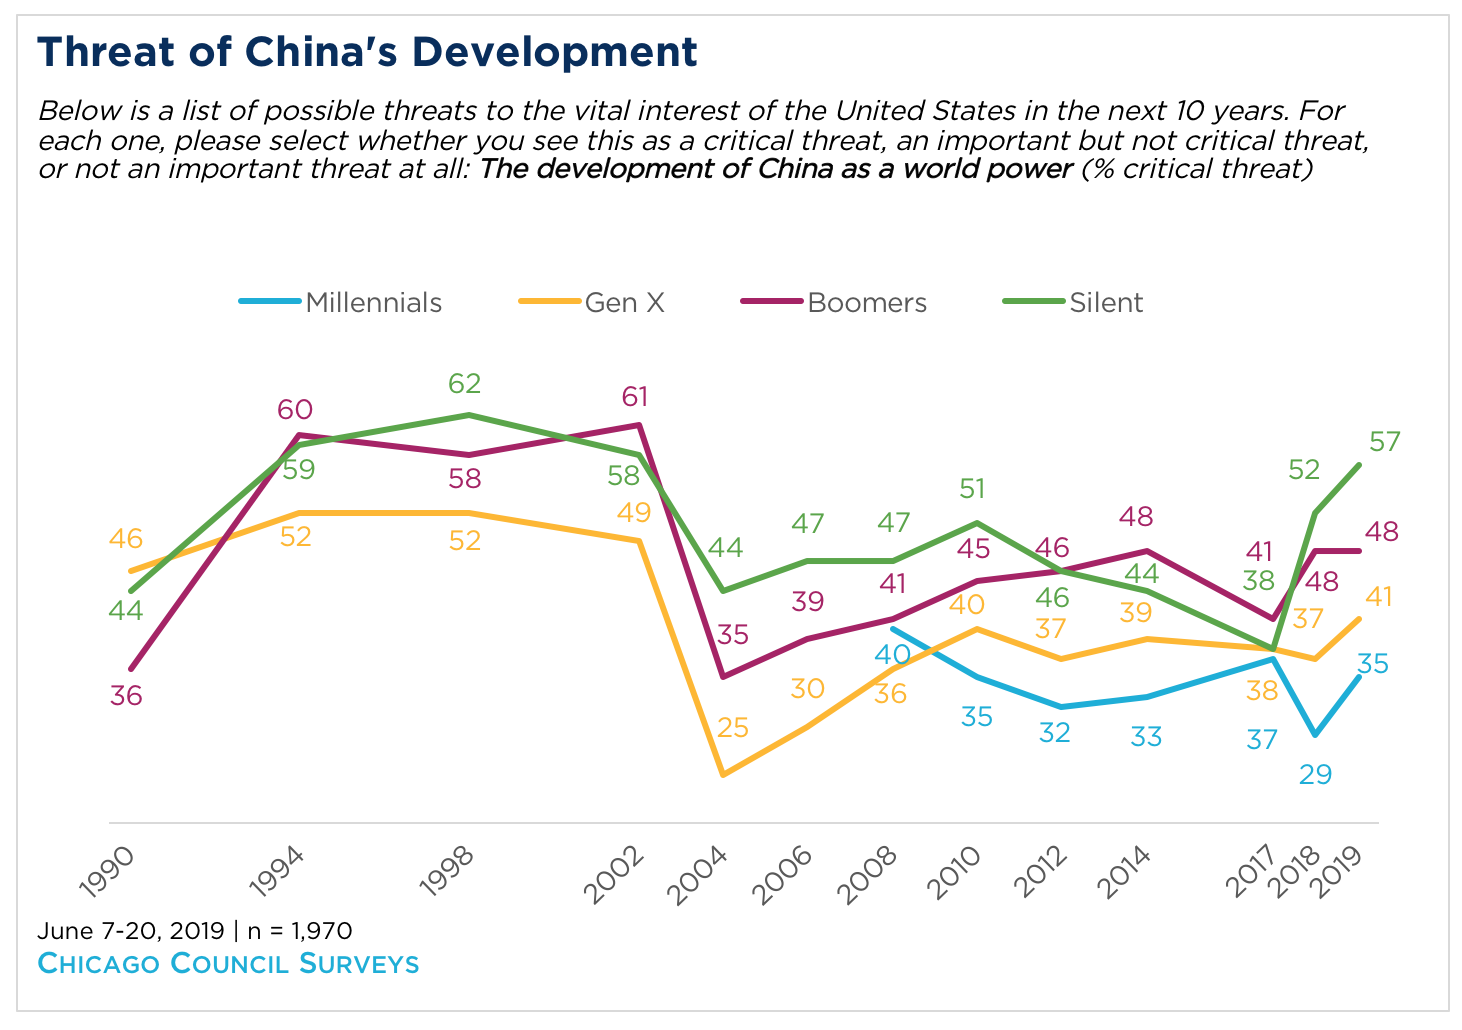 Line graph showing the threat of China's development